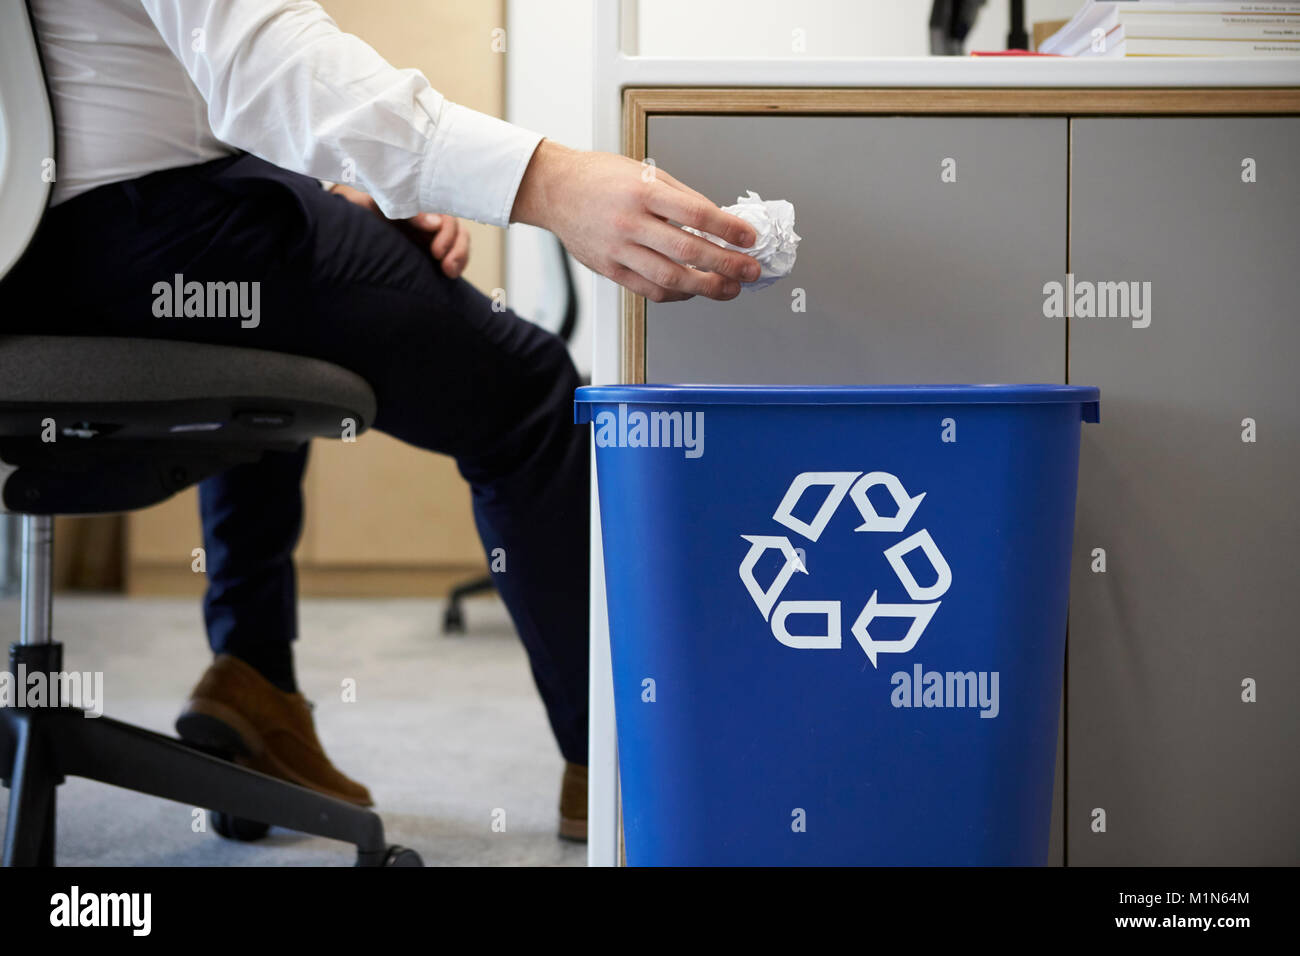 Man dropping screwed up paper into recycling bin, close up Stock Photo